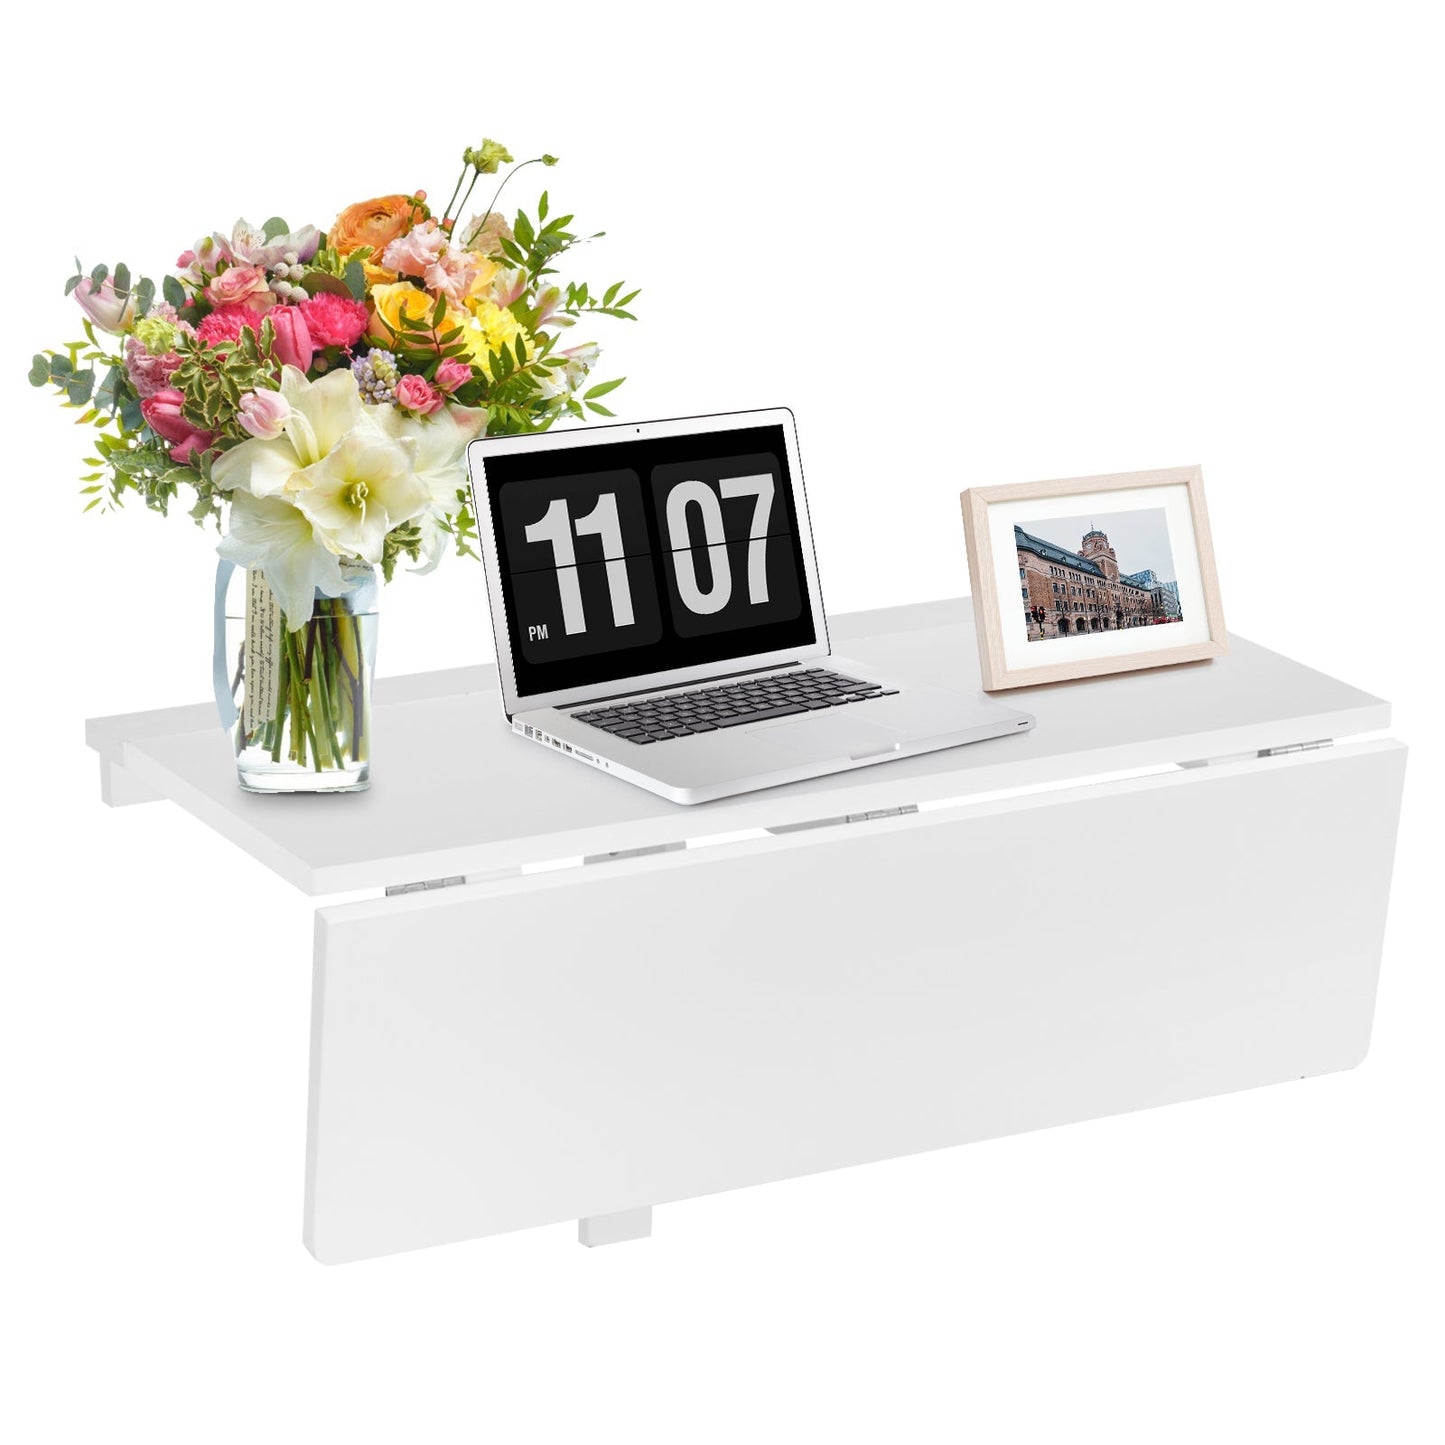 80 x 60 cm Wall Mounted Folding Table Drop-Leaf Floating Writing Desk-White